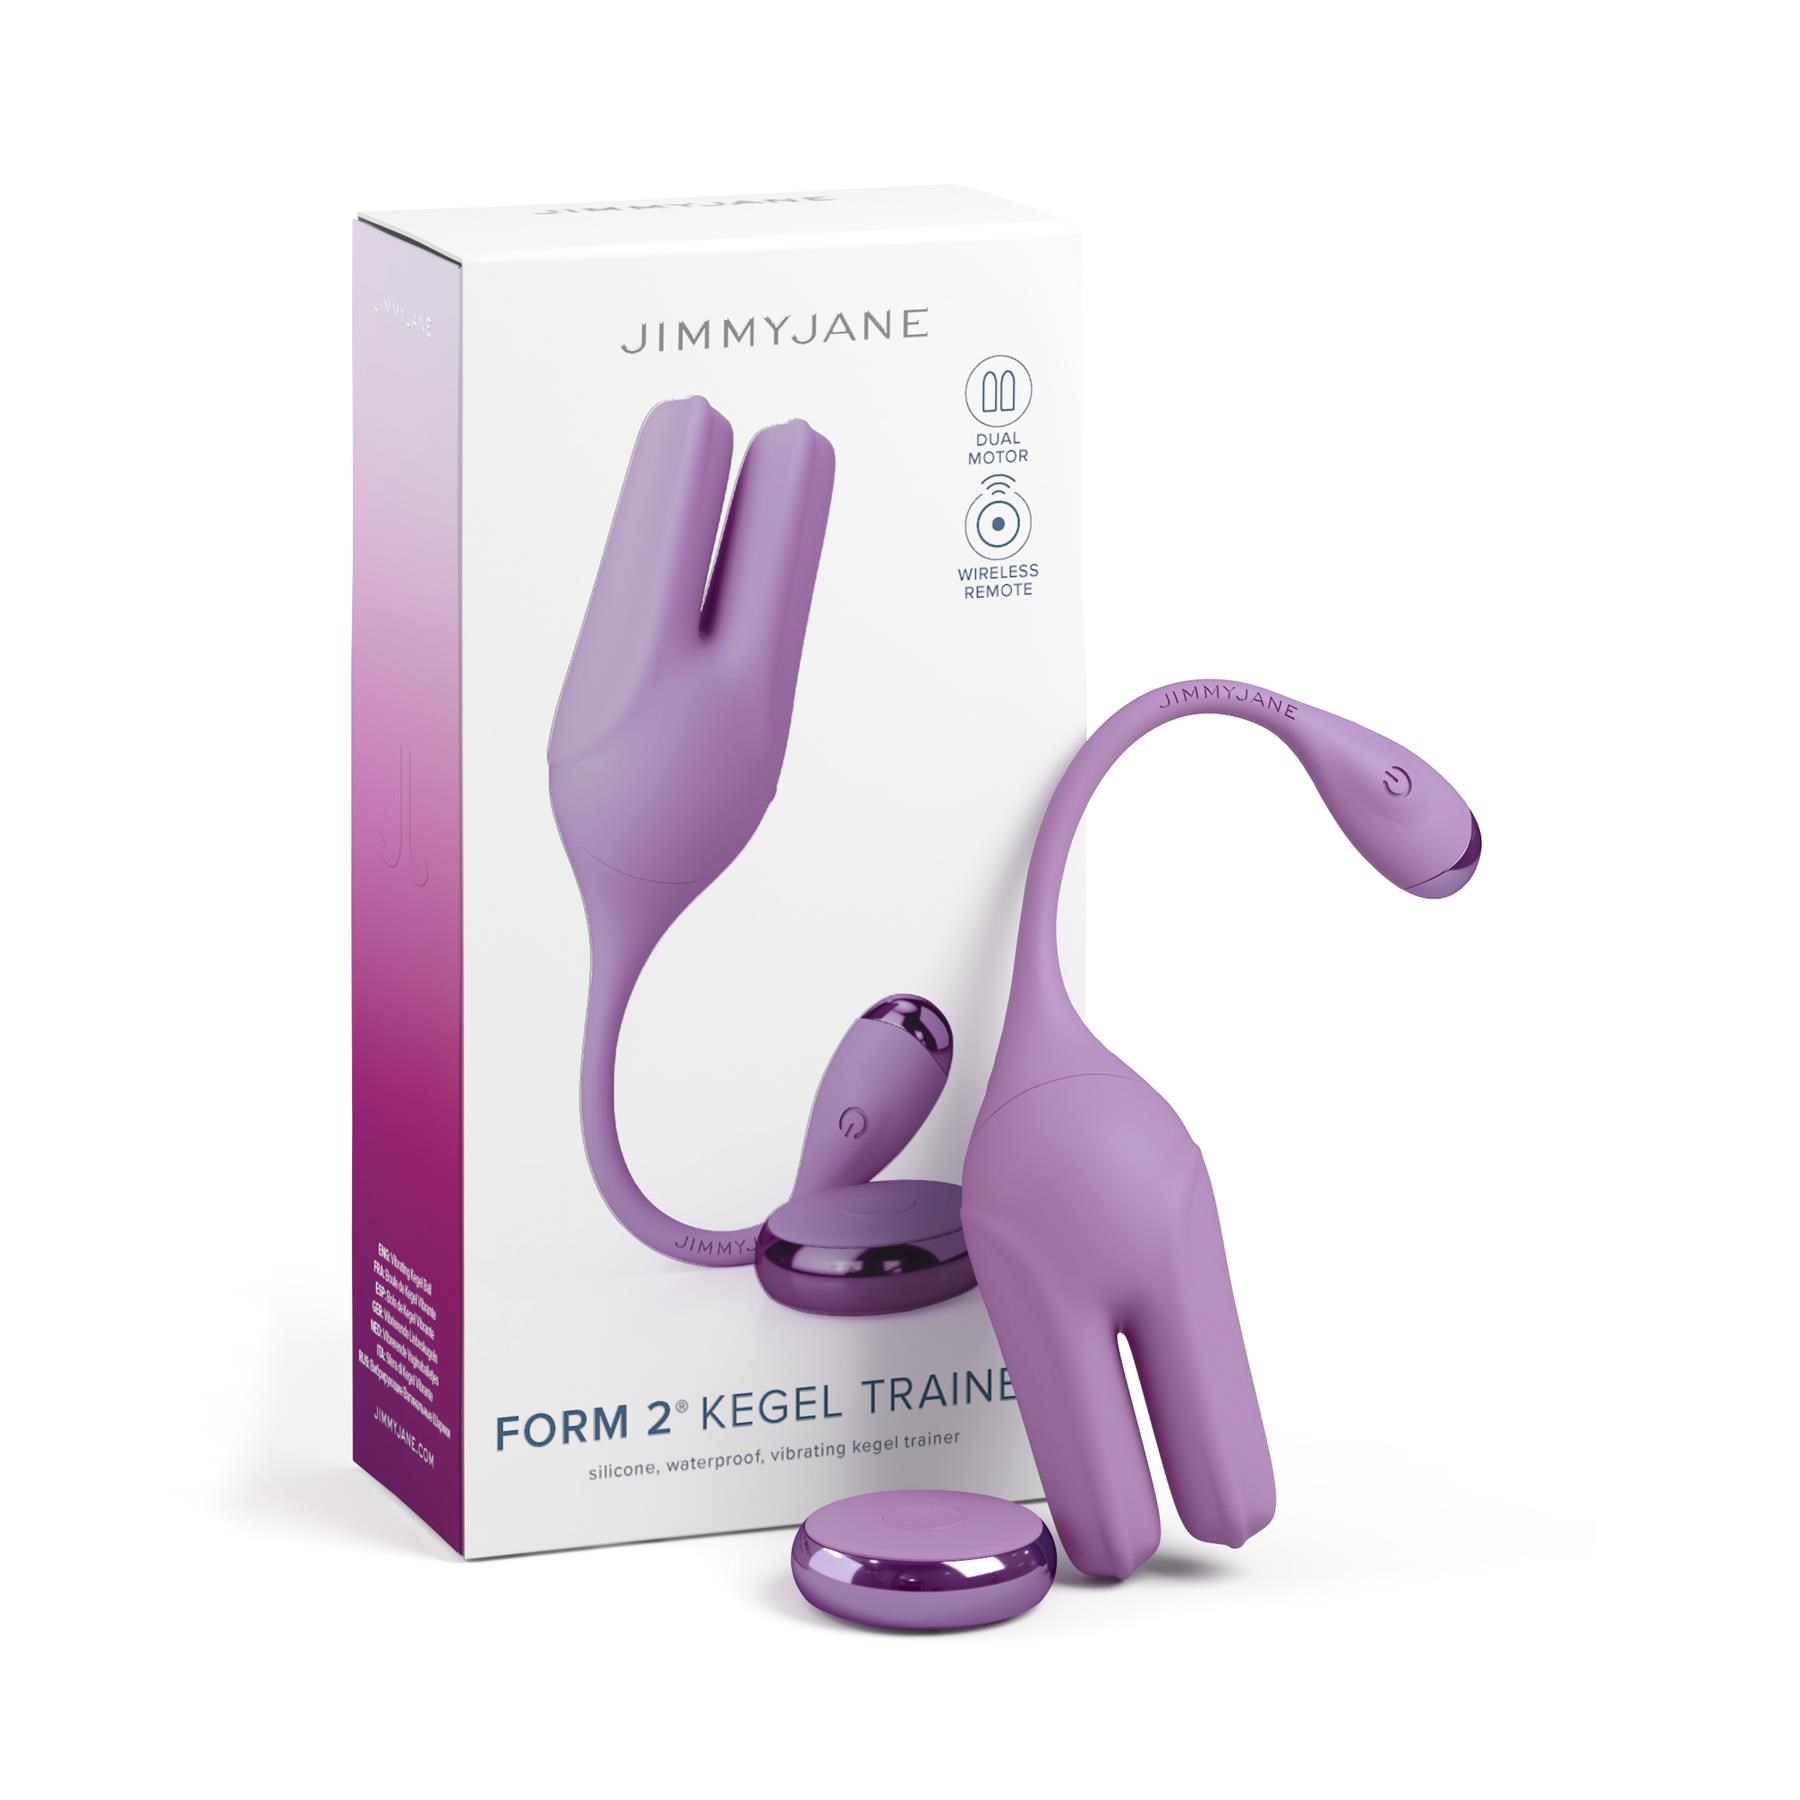 Jimmy Jane Form 2 Kegel Trainer With Remote Control - Product and Packaging